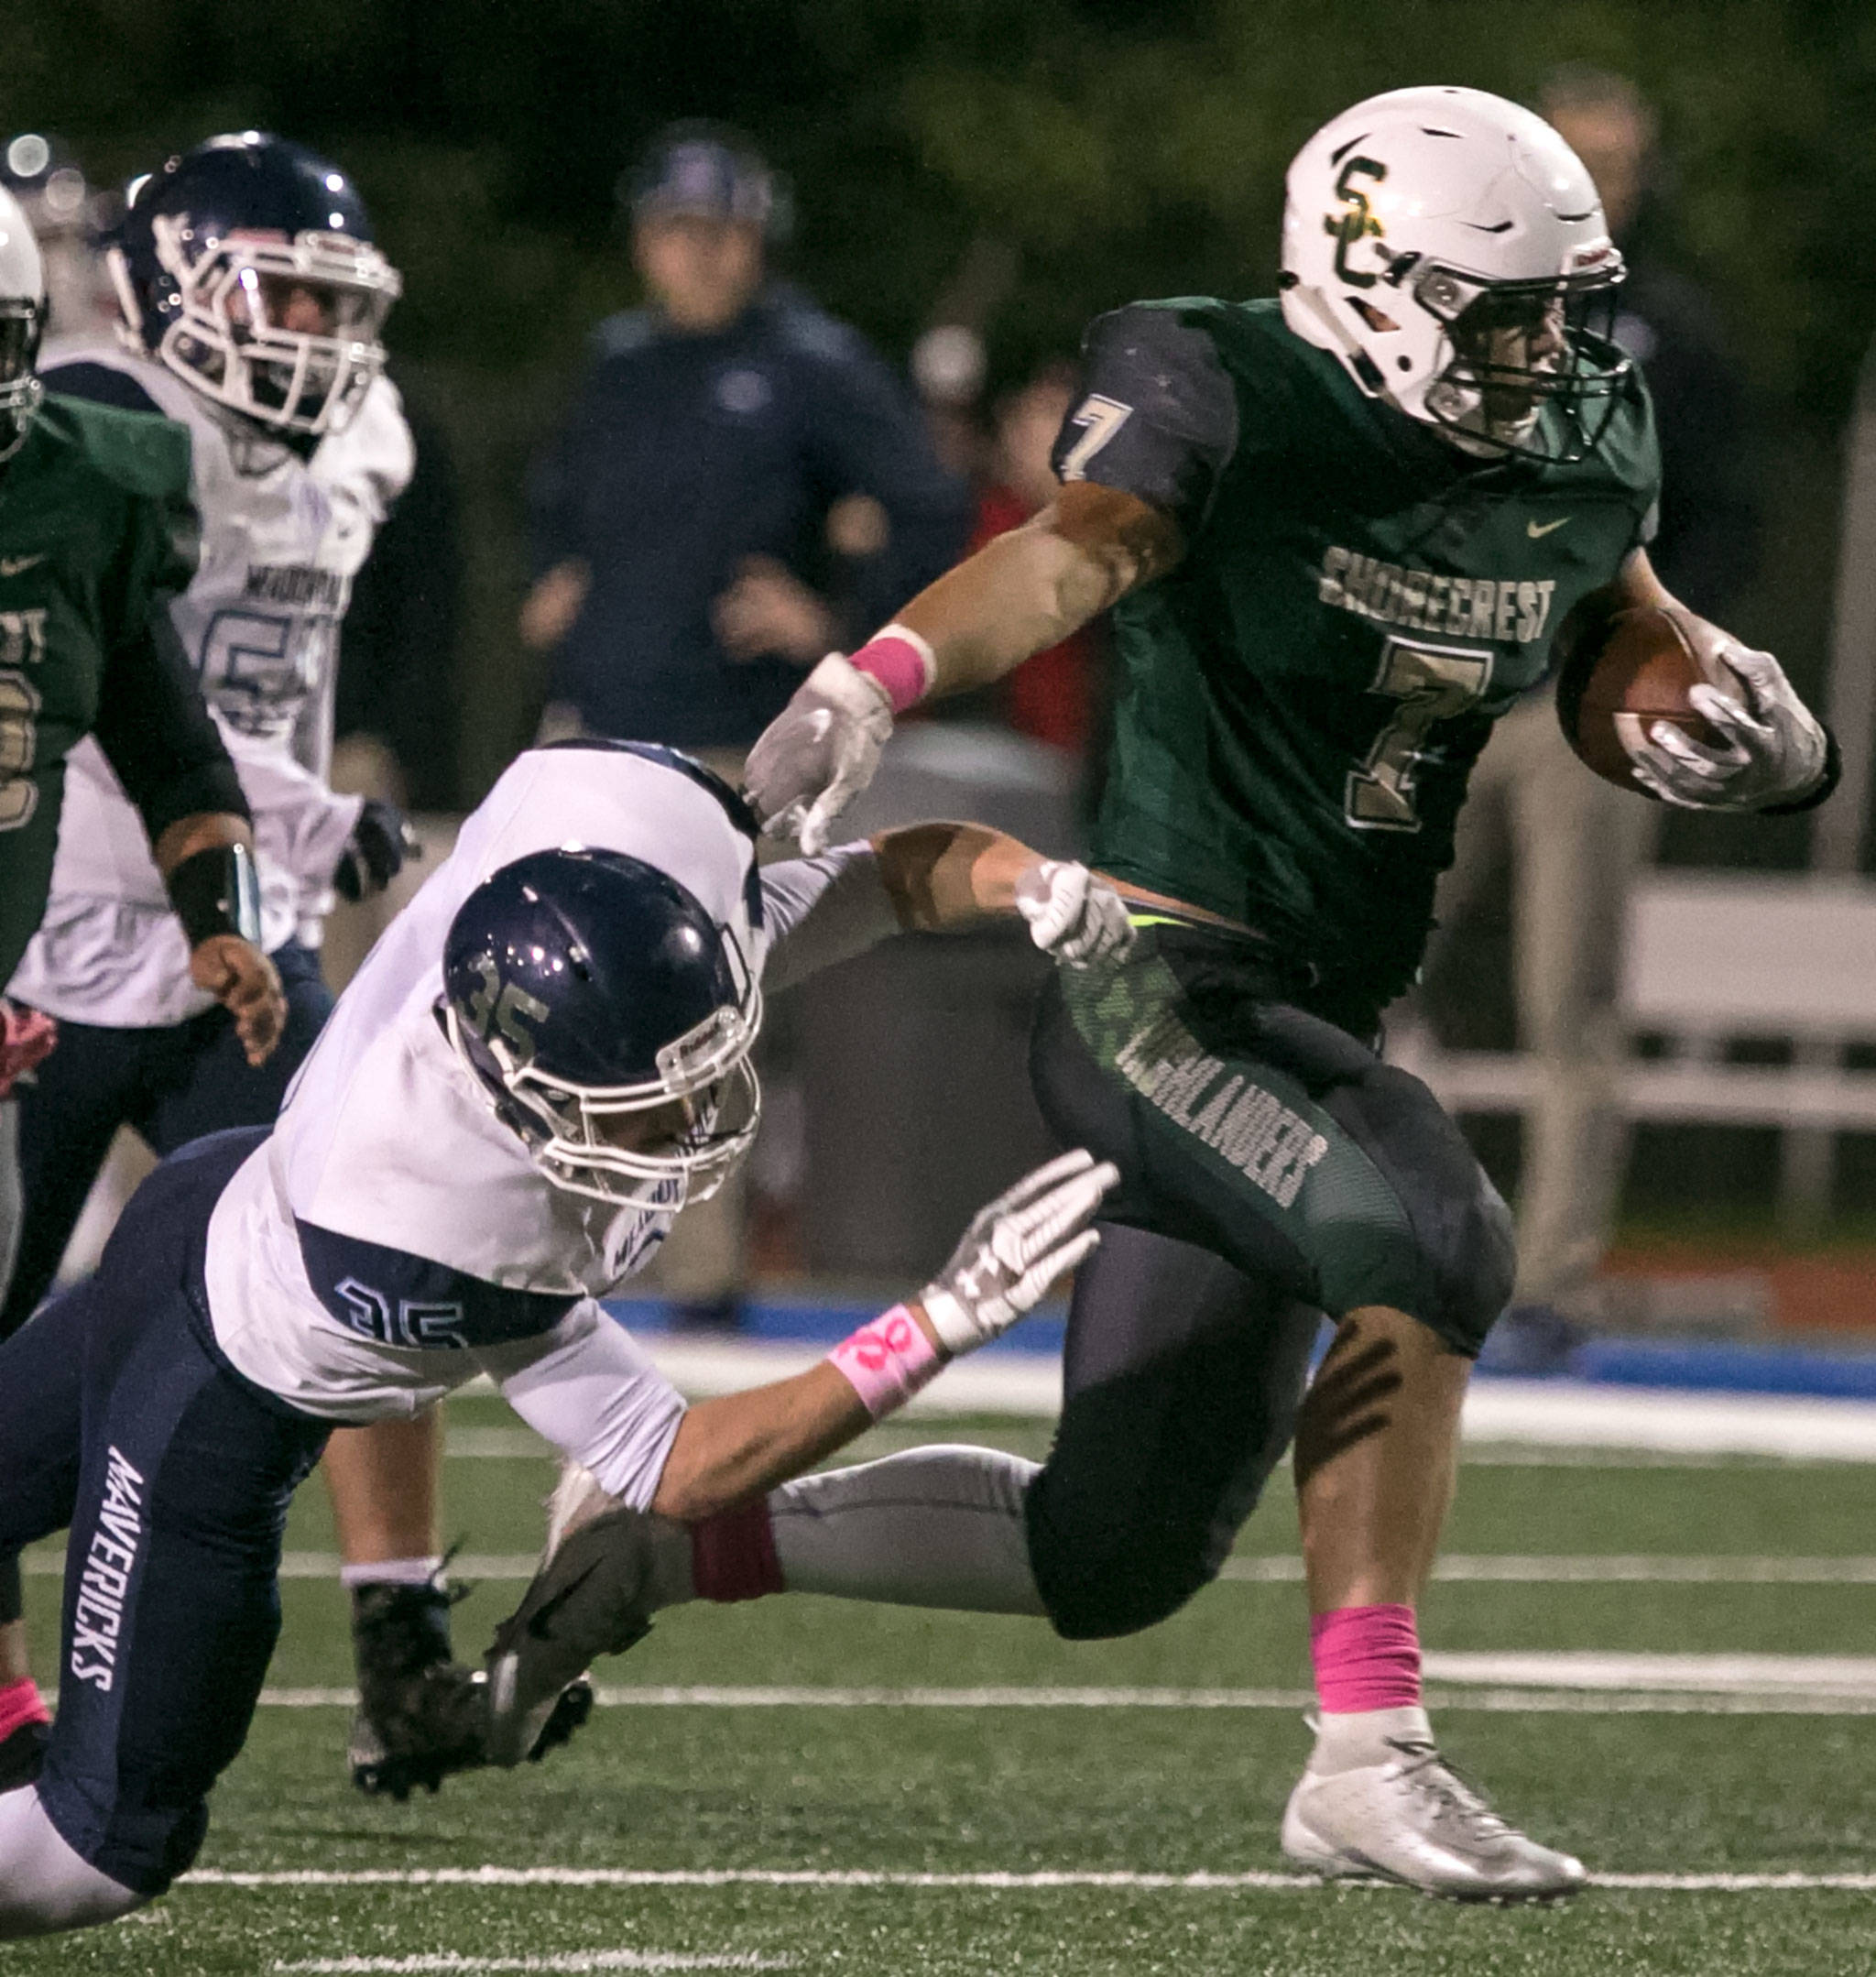 Shorecrest’s Markus Selzler avoids a tackle by Meadowdale’s Mason Vaughn during a game Friday night at Shoreline Stadium. (Kevin Clark / The Herald)